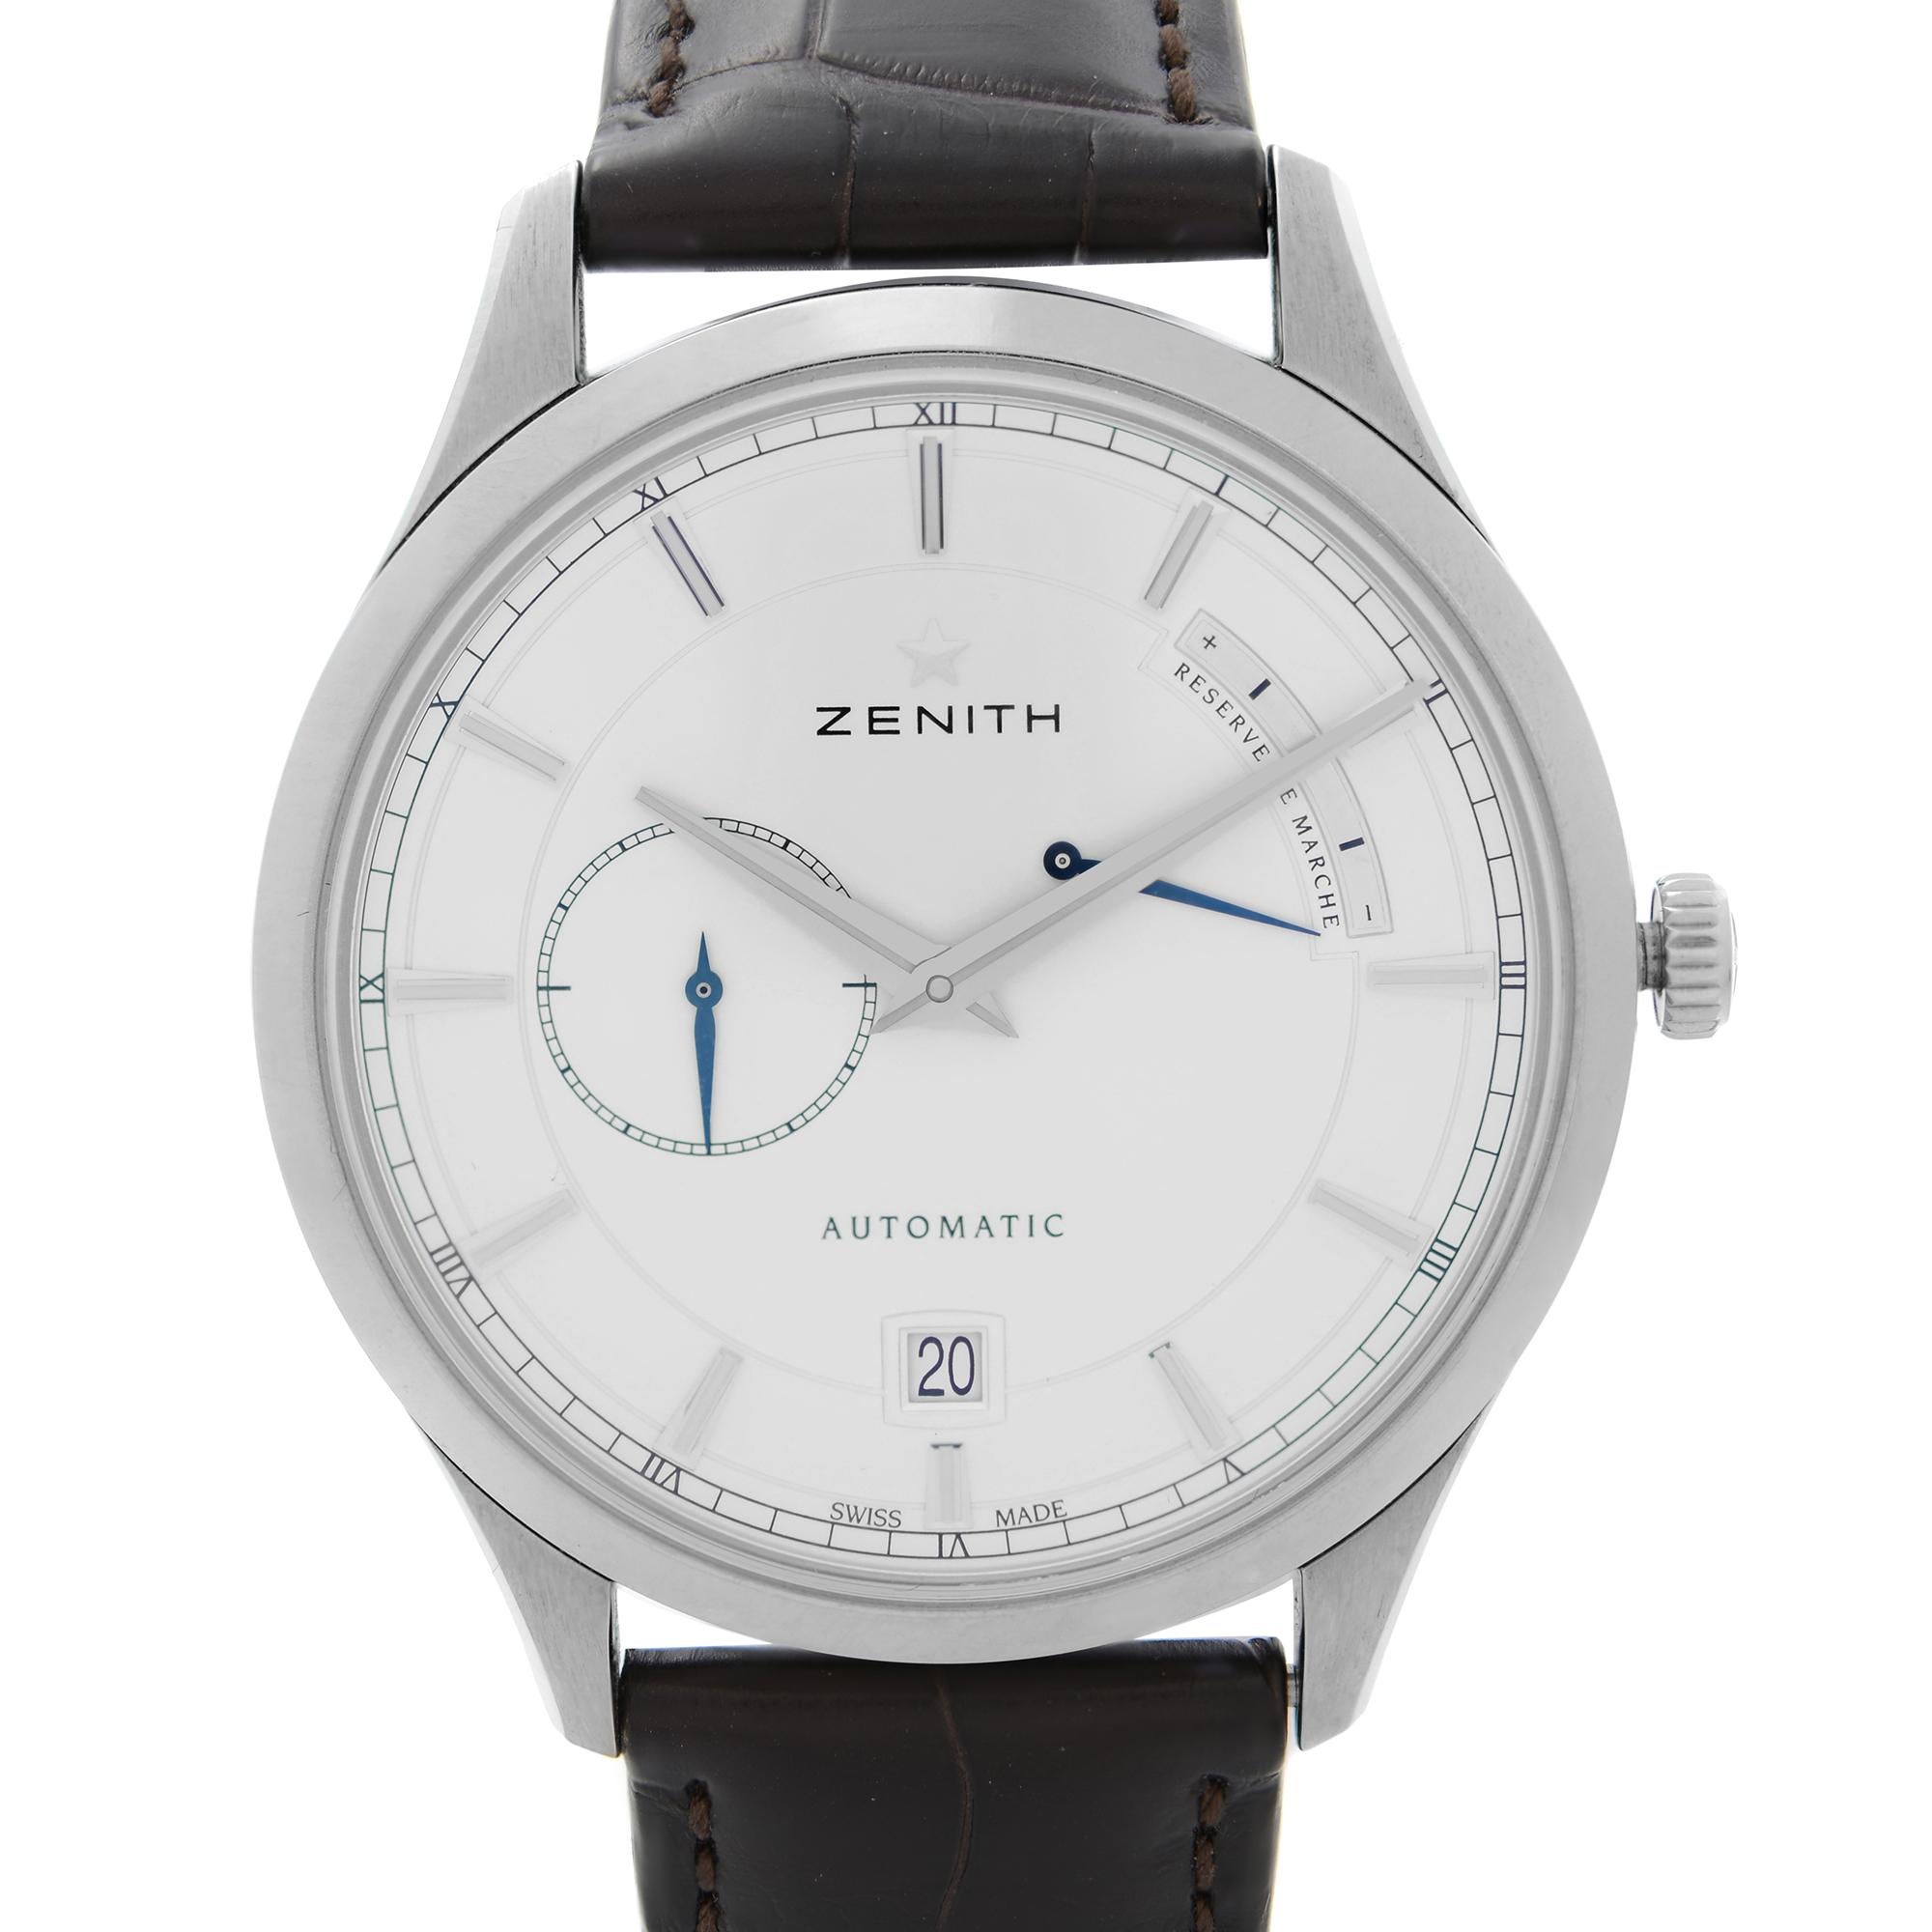 Unworn Zenith Captain 40mm Stainless Steel Power Reserve Silver Dial Men's Automatic Watch 03.2122.685/01.C498. The Watch is powered by an Automatic Movement. This Beautiful Timepiece Features: Polished Stainless Steel Round Case and Two-Piece